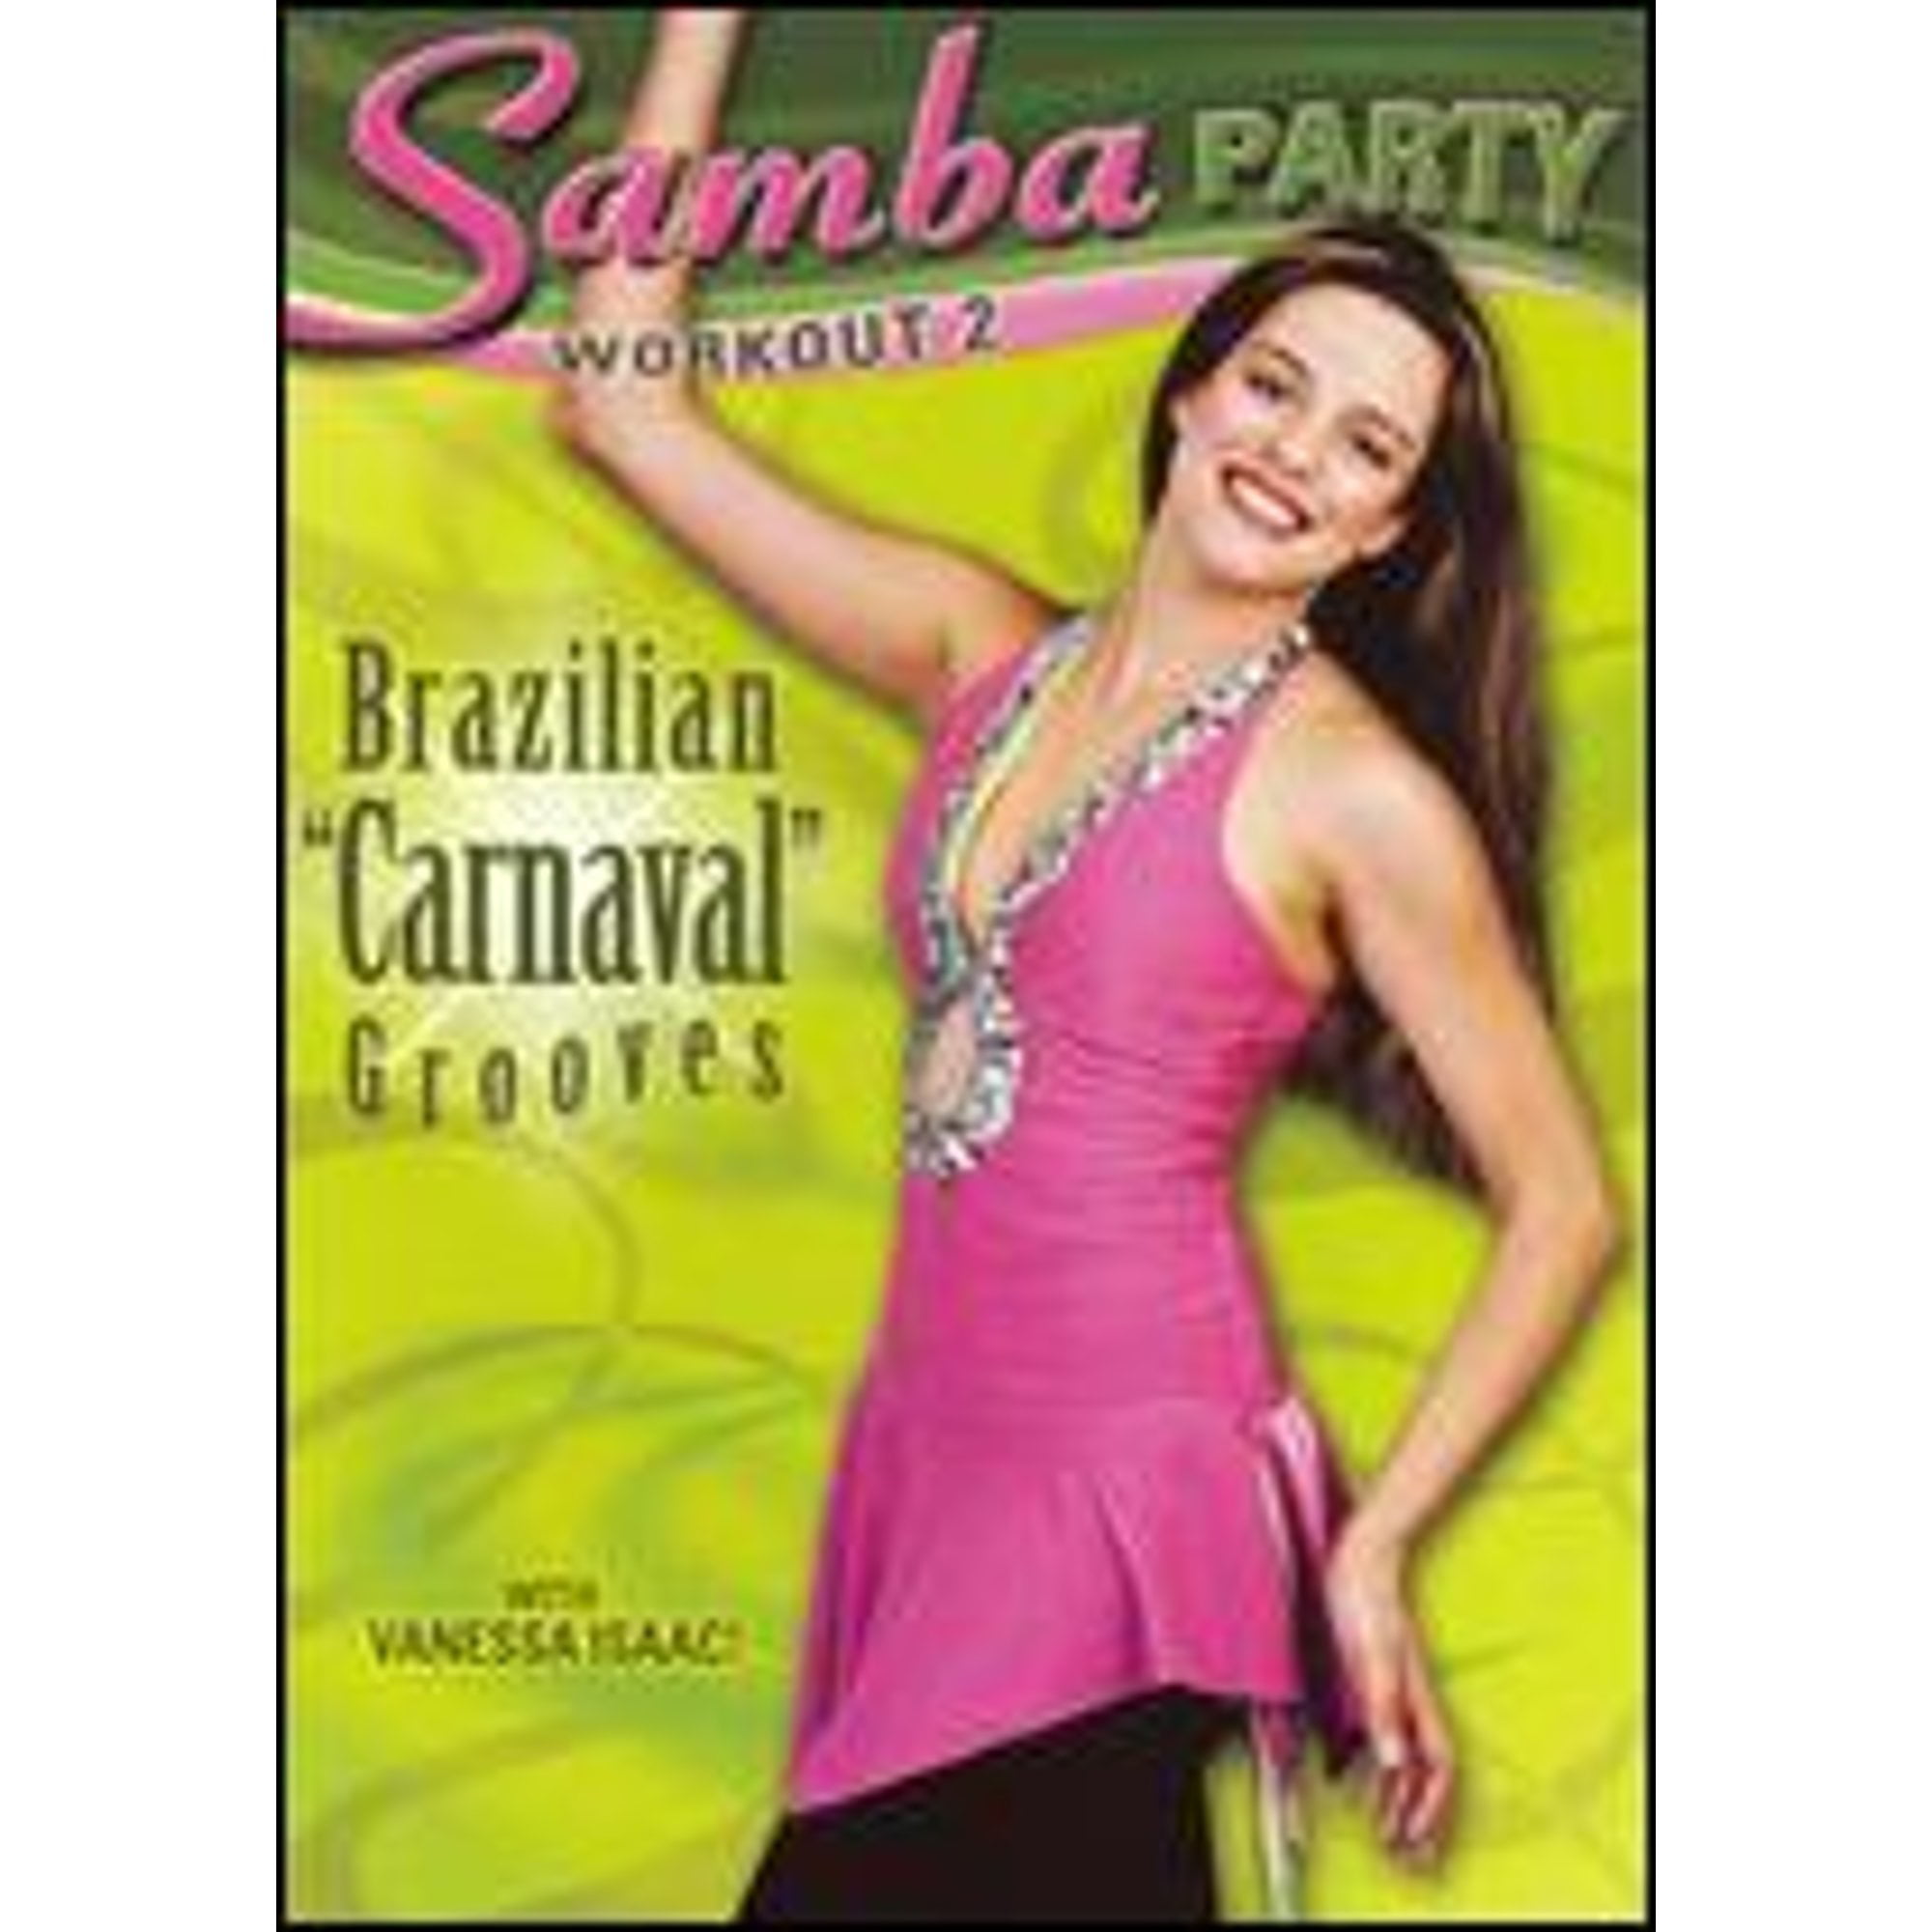 Samba Party Workout 2 Brazilian Carnaval Grooves Pre Owned Dvd 0690445022127 Directed By